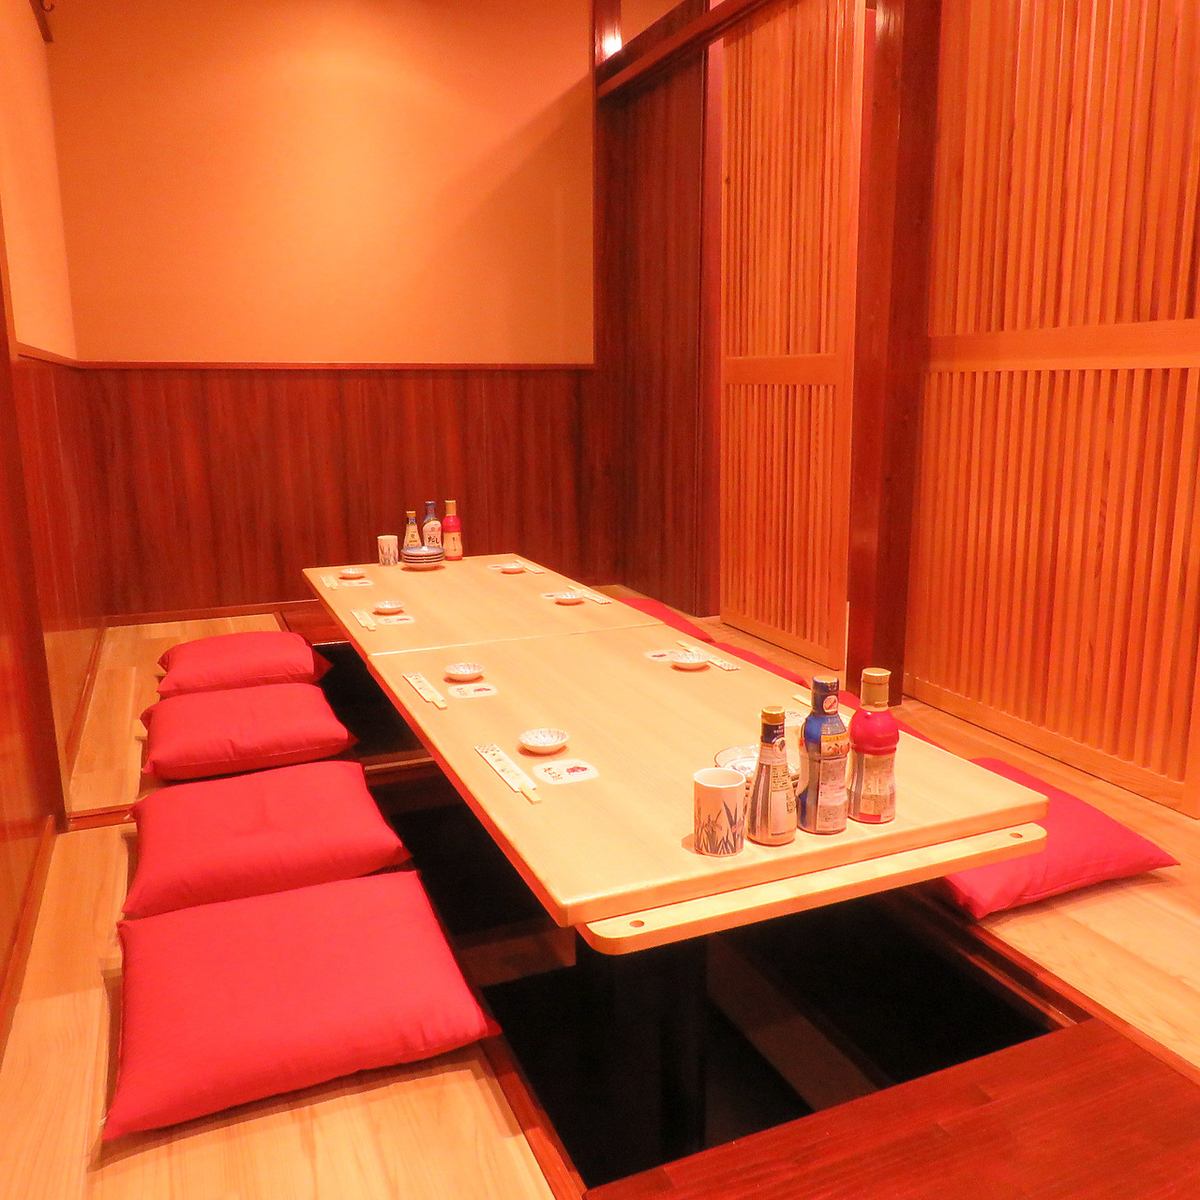 We have a private room with a sunken kotatsu where you can relax and relax! Make your reservation early!